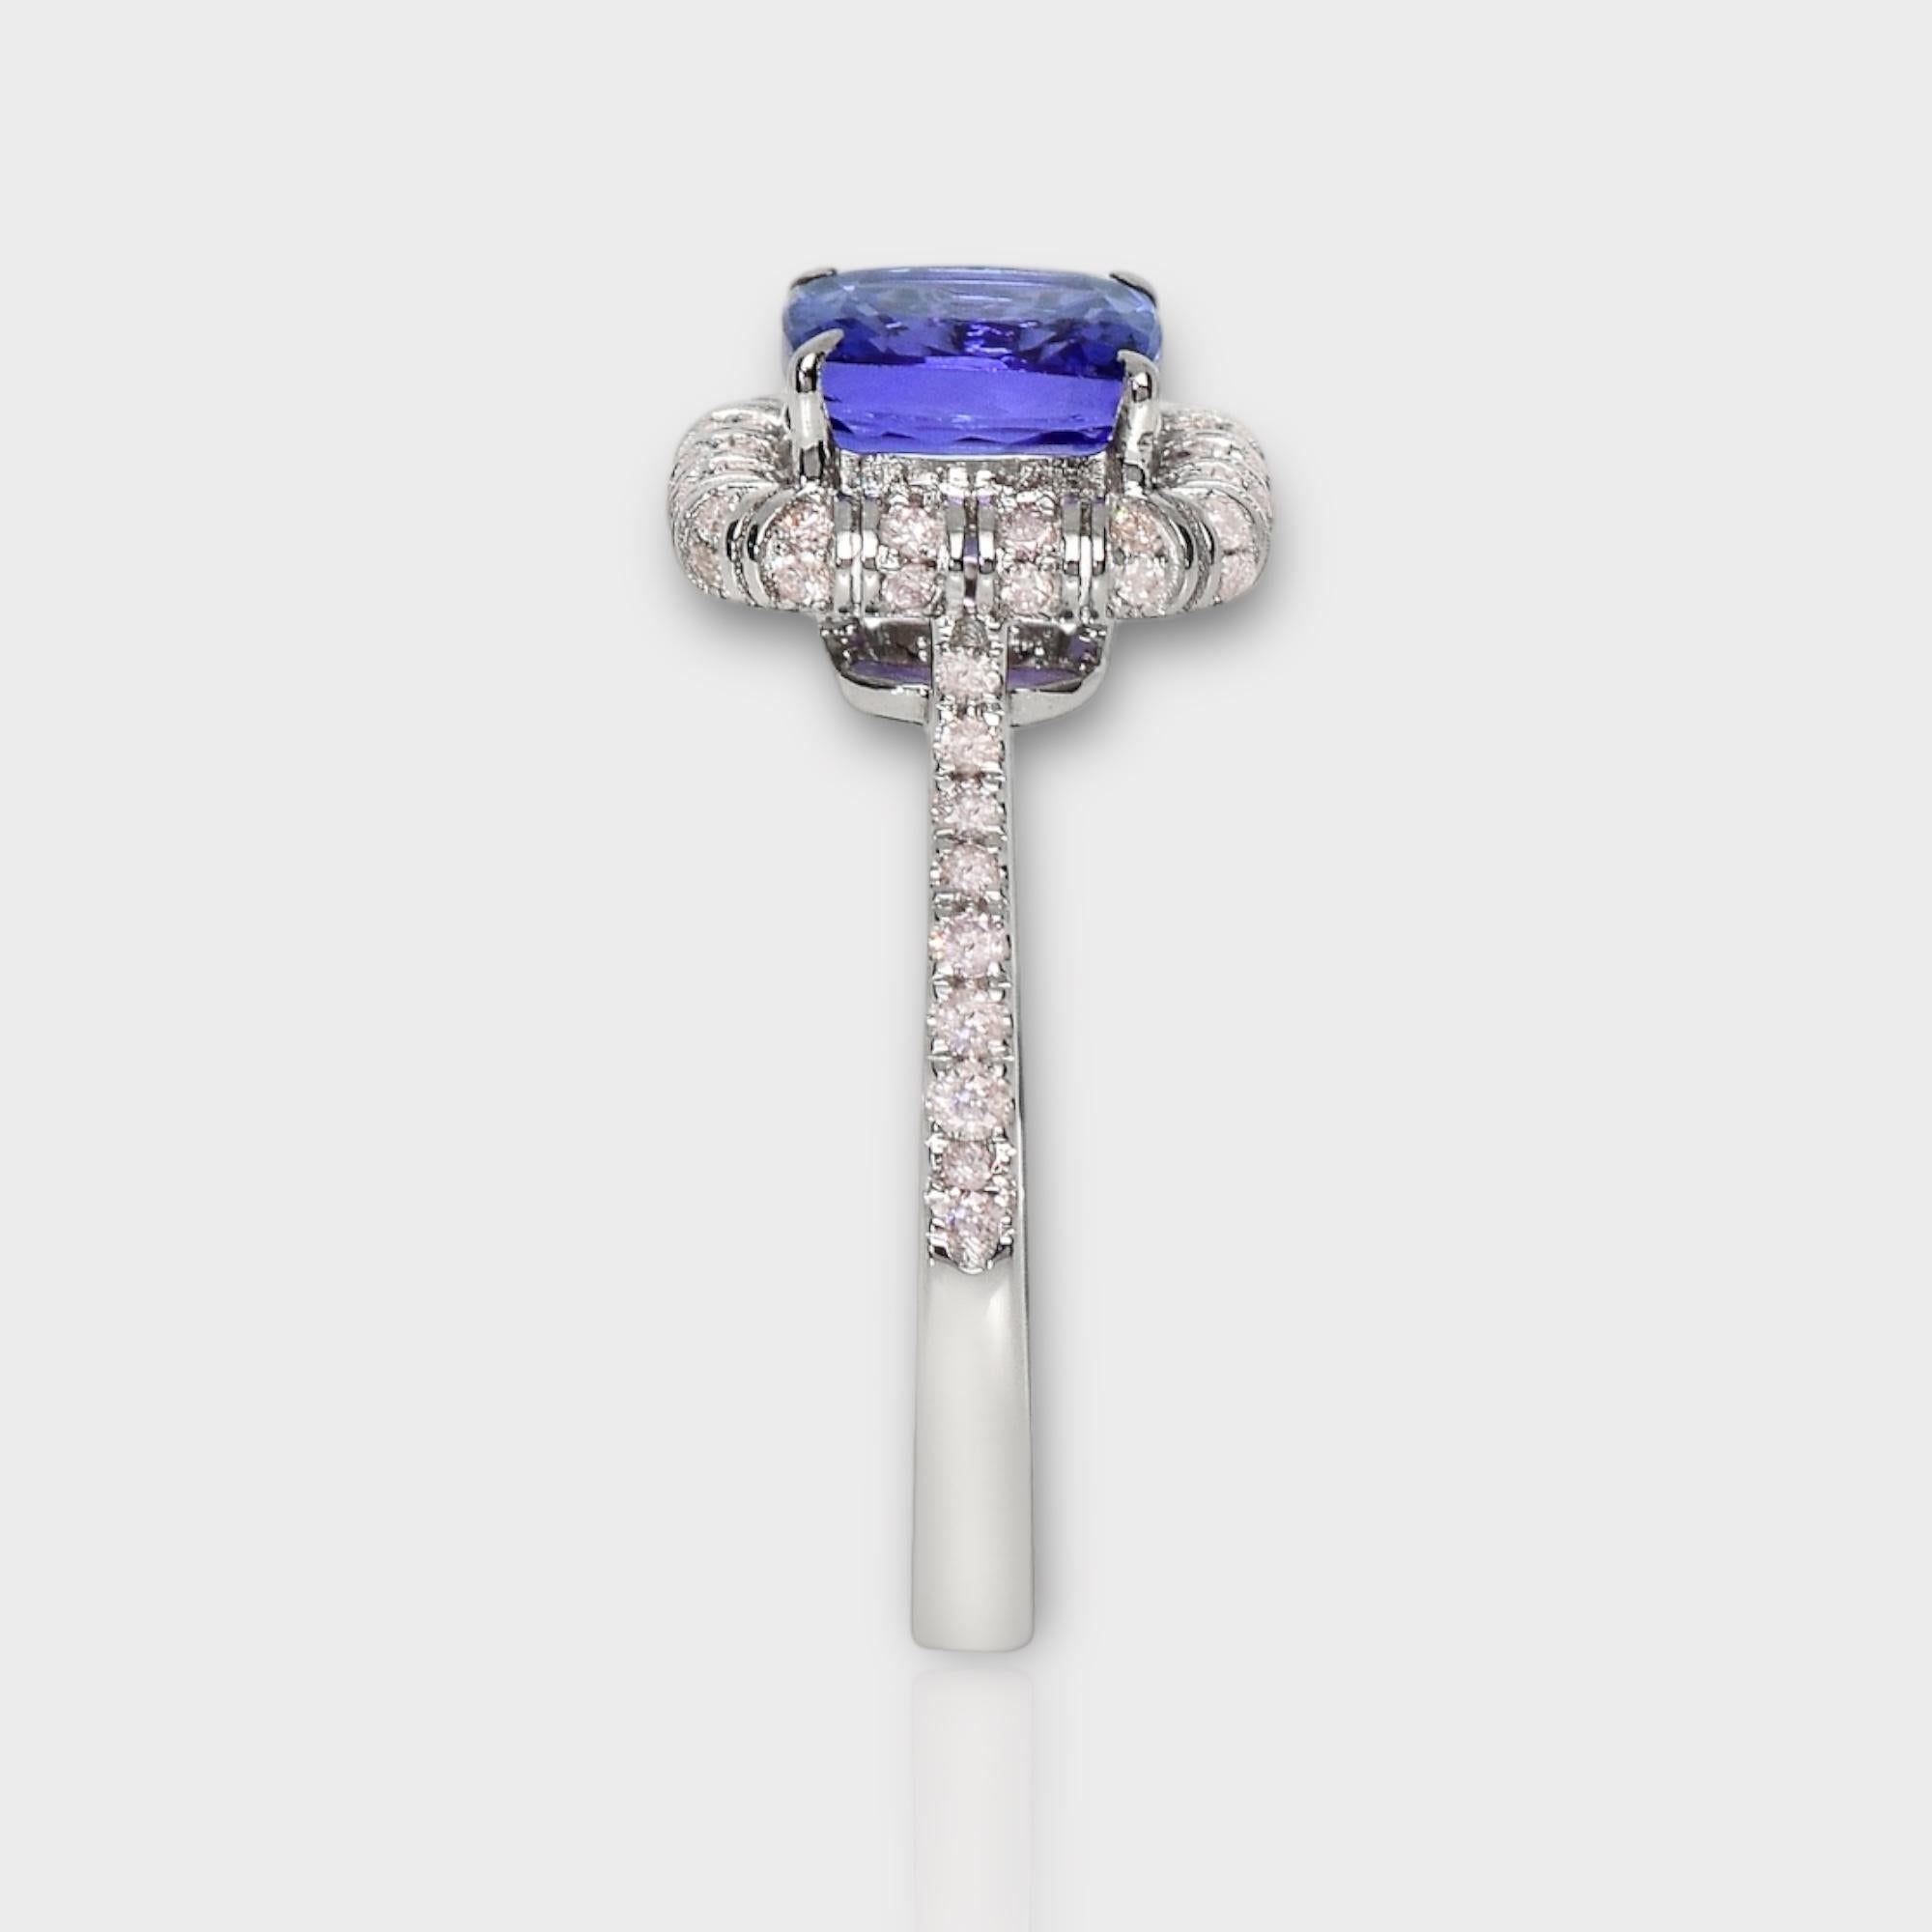 IGI 14K 2.13 ct Tanzanite&Pink Diamond Antique Art Deco Engagement Ring In New Condition For Sale In Kaohsiung City, TW